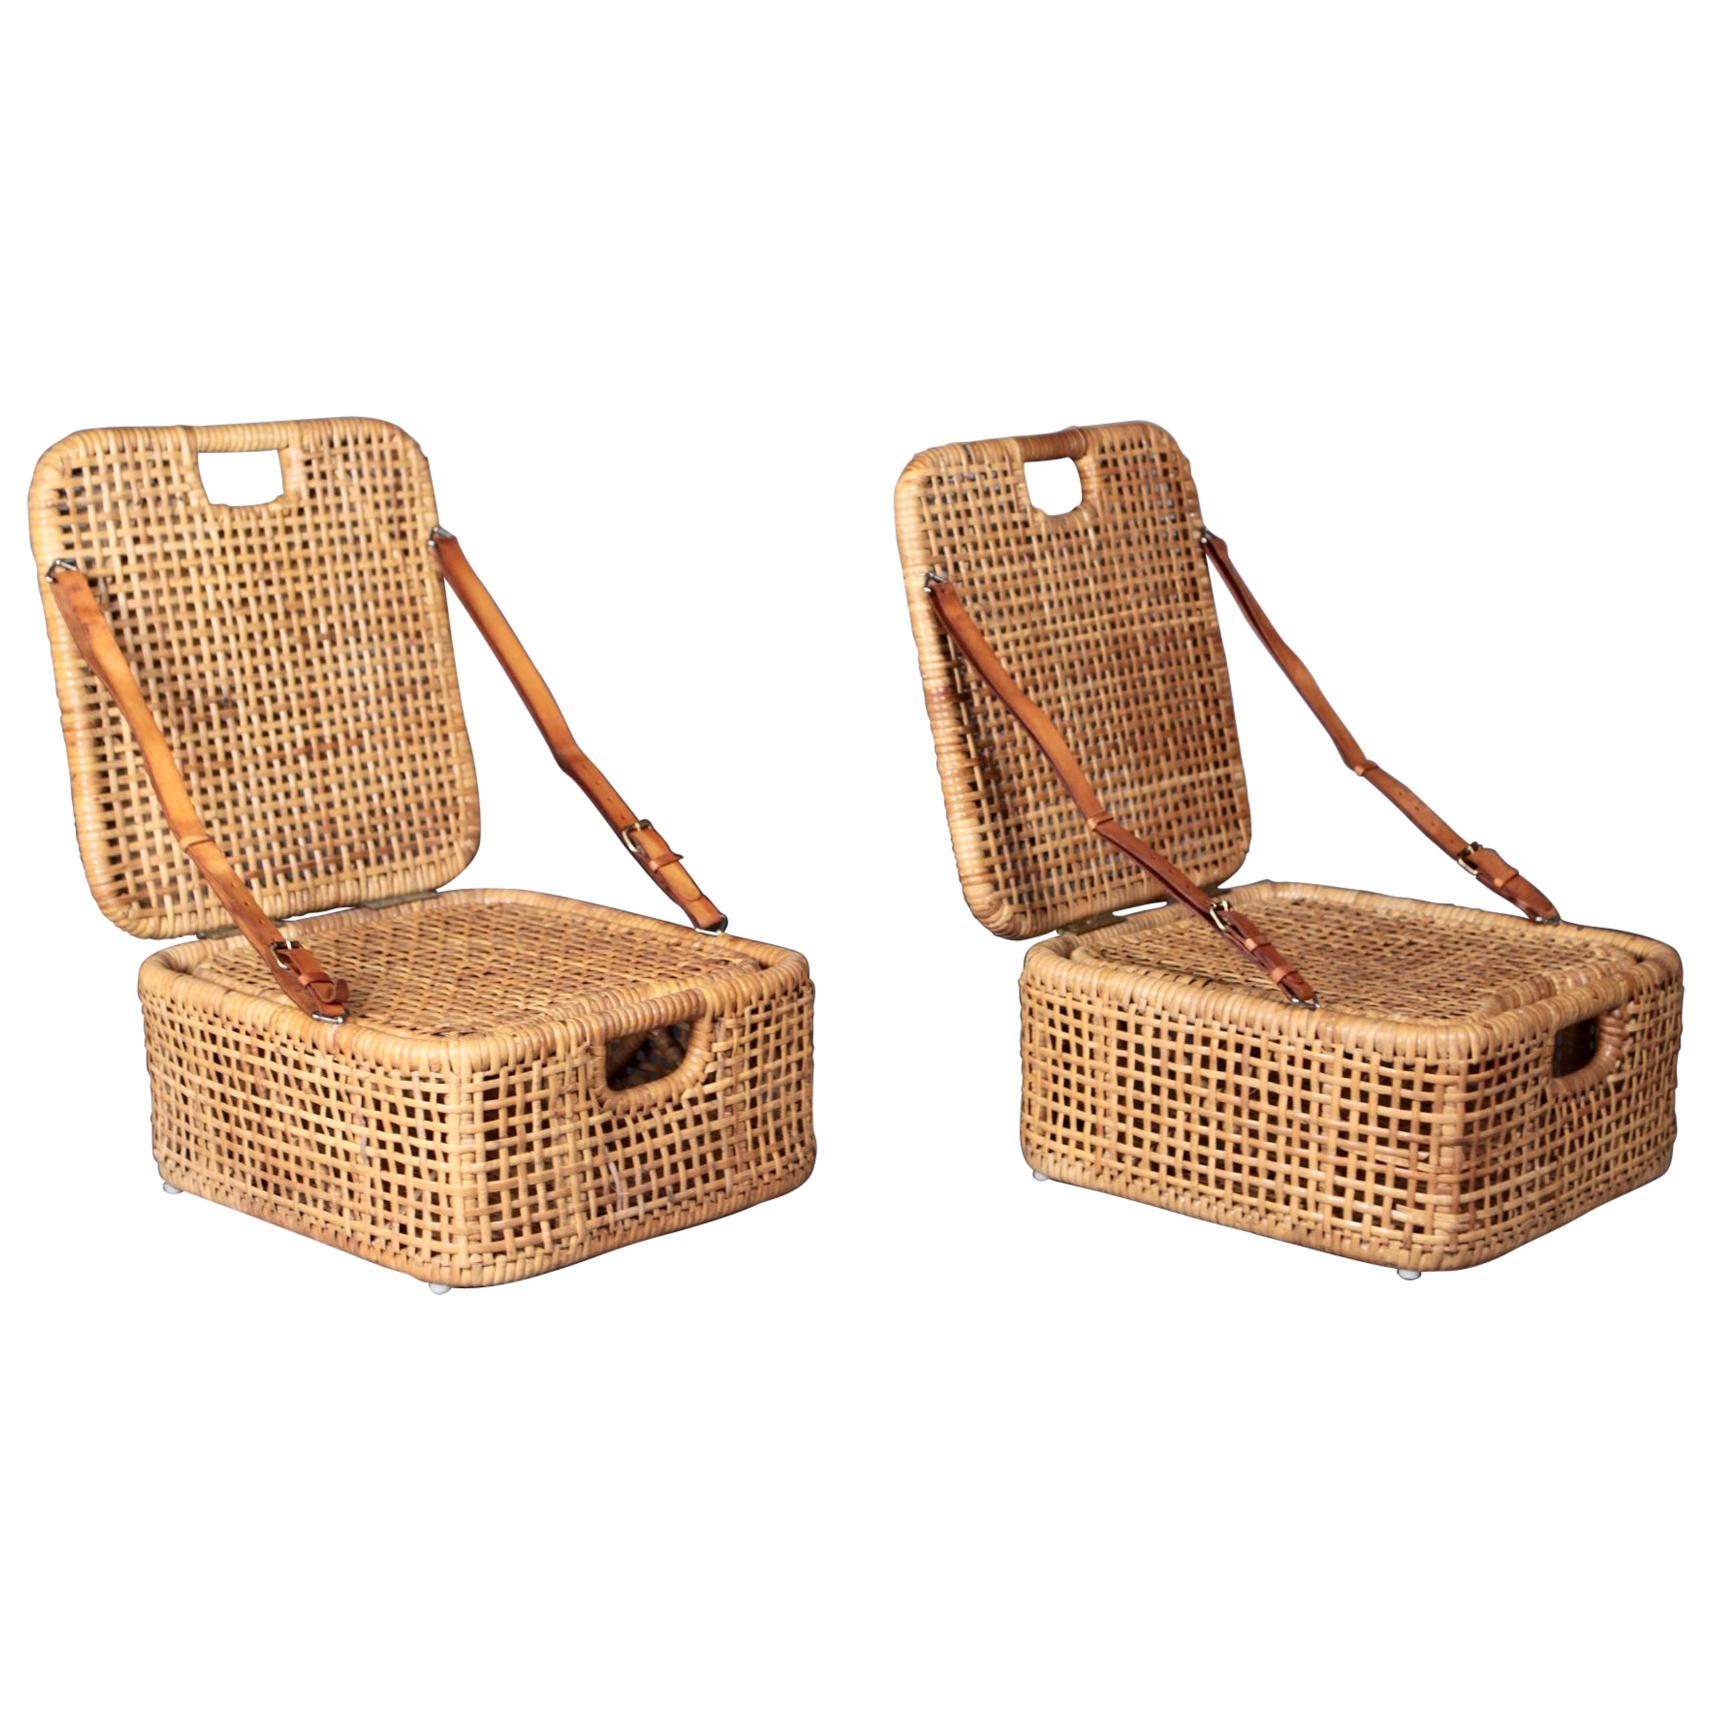 Picnic Chairs, Cane and Leather, Sweden, 1950s